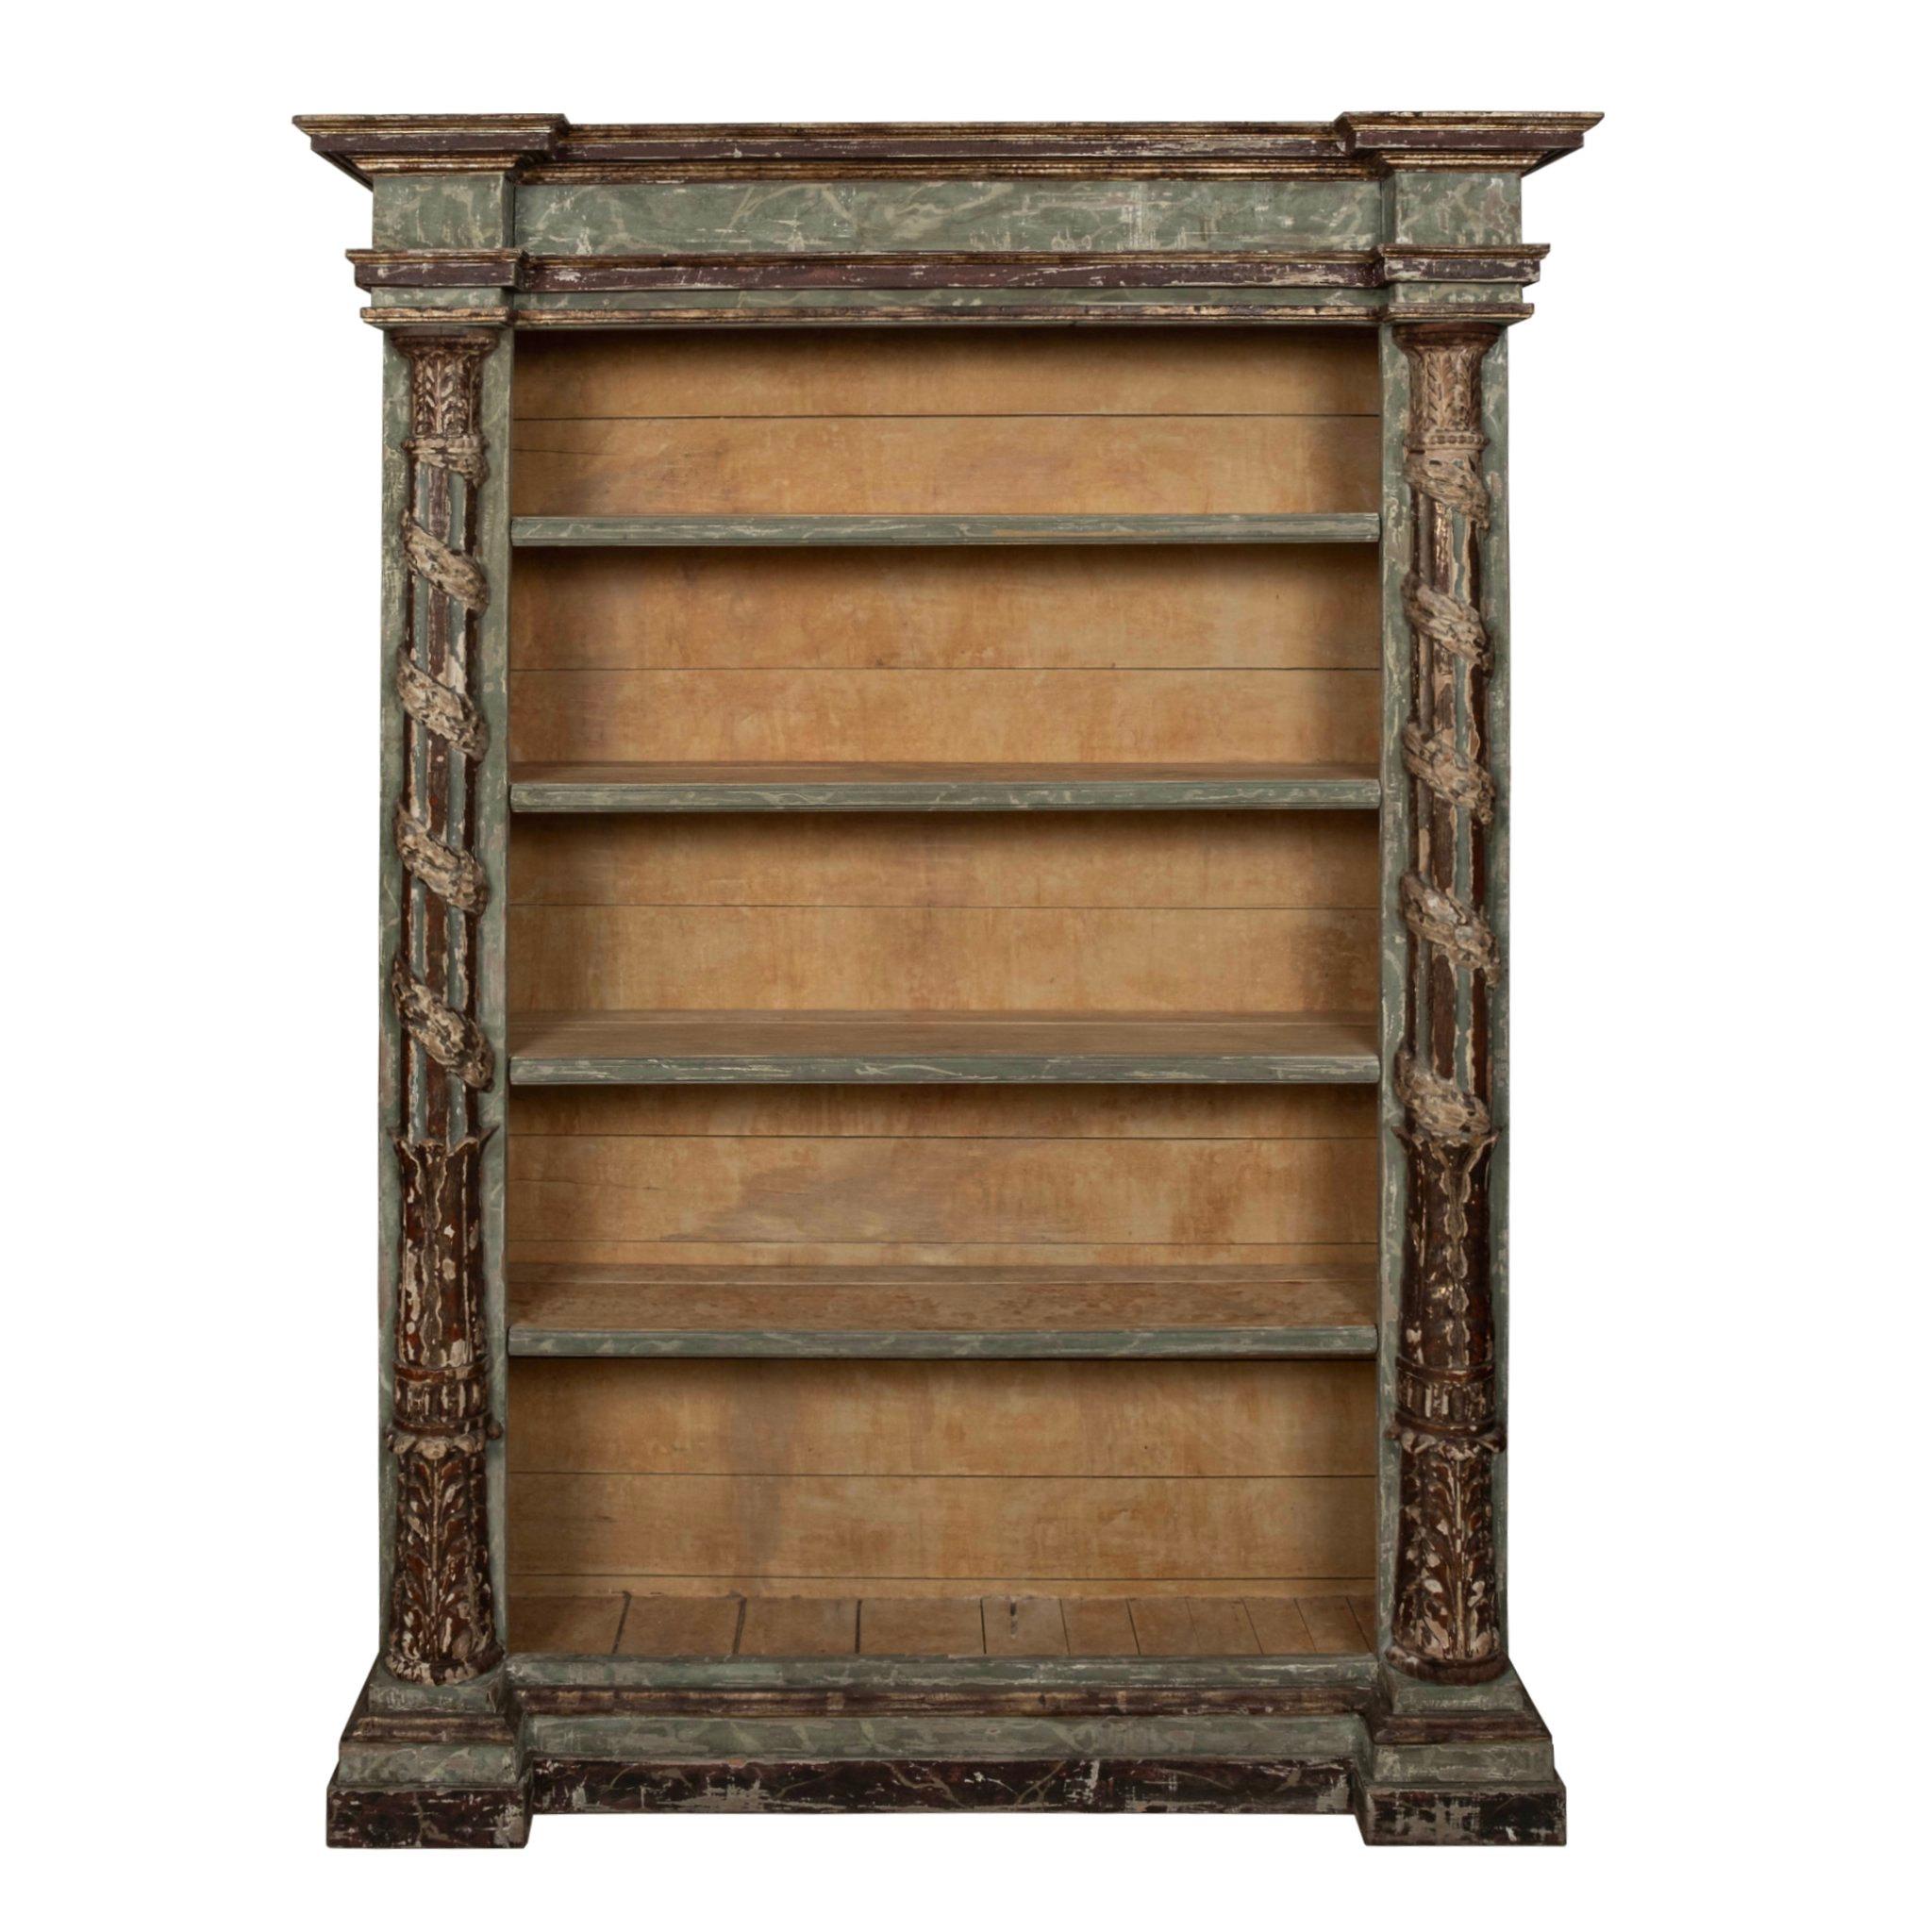 A beautiful and stately Louis XVI style gessoed and polychromed bookcase made with 18th century architectural fragments.